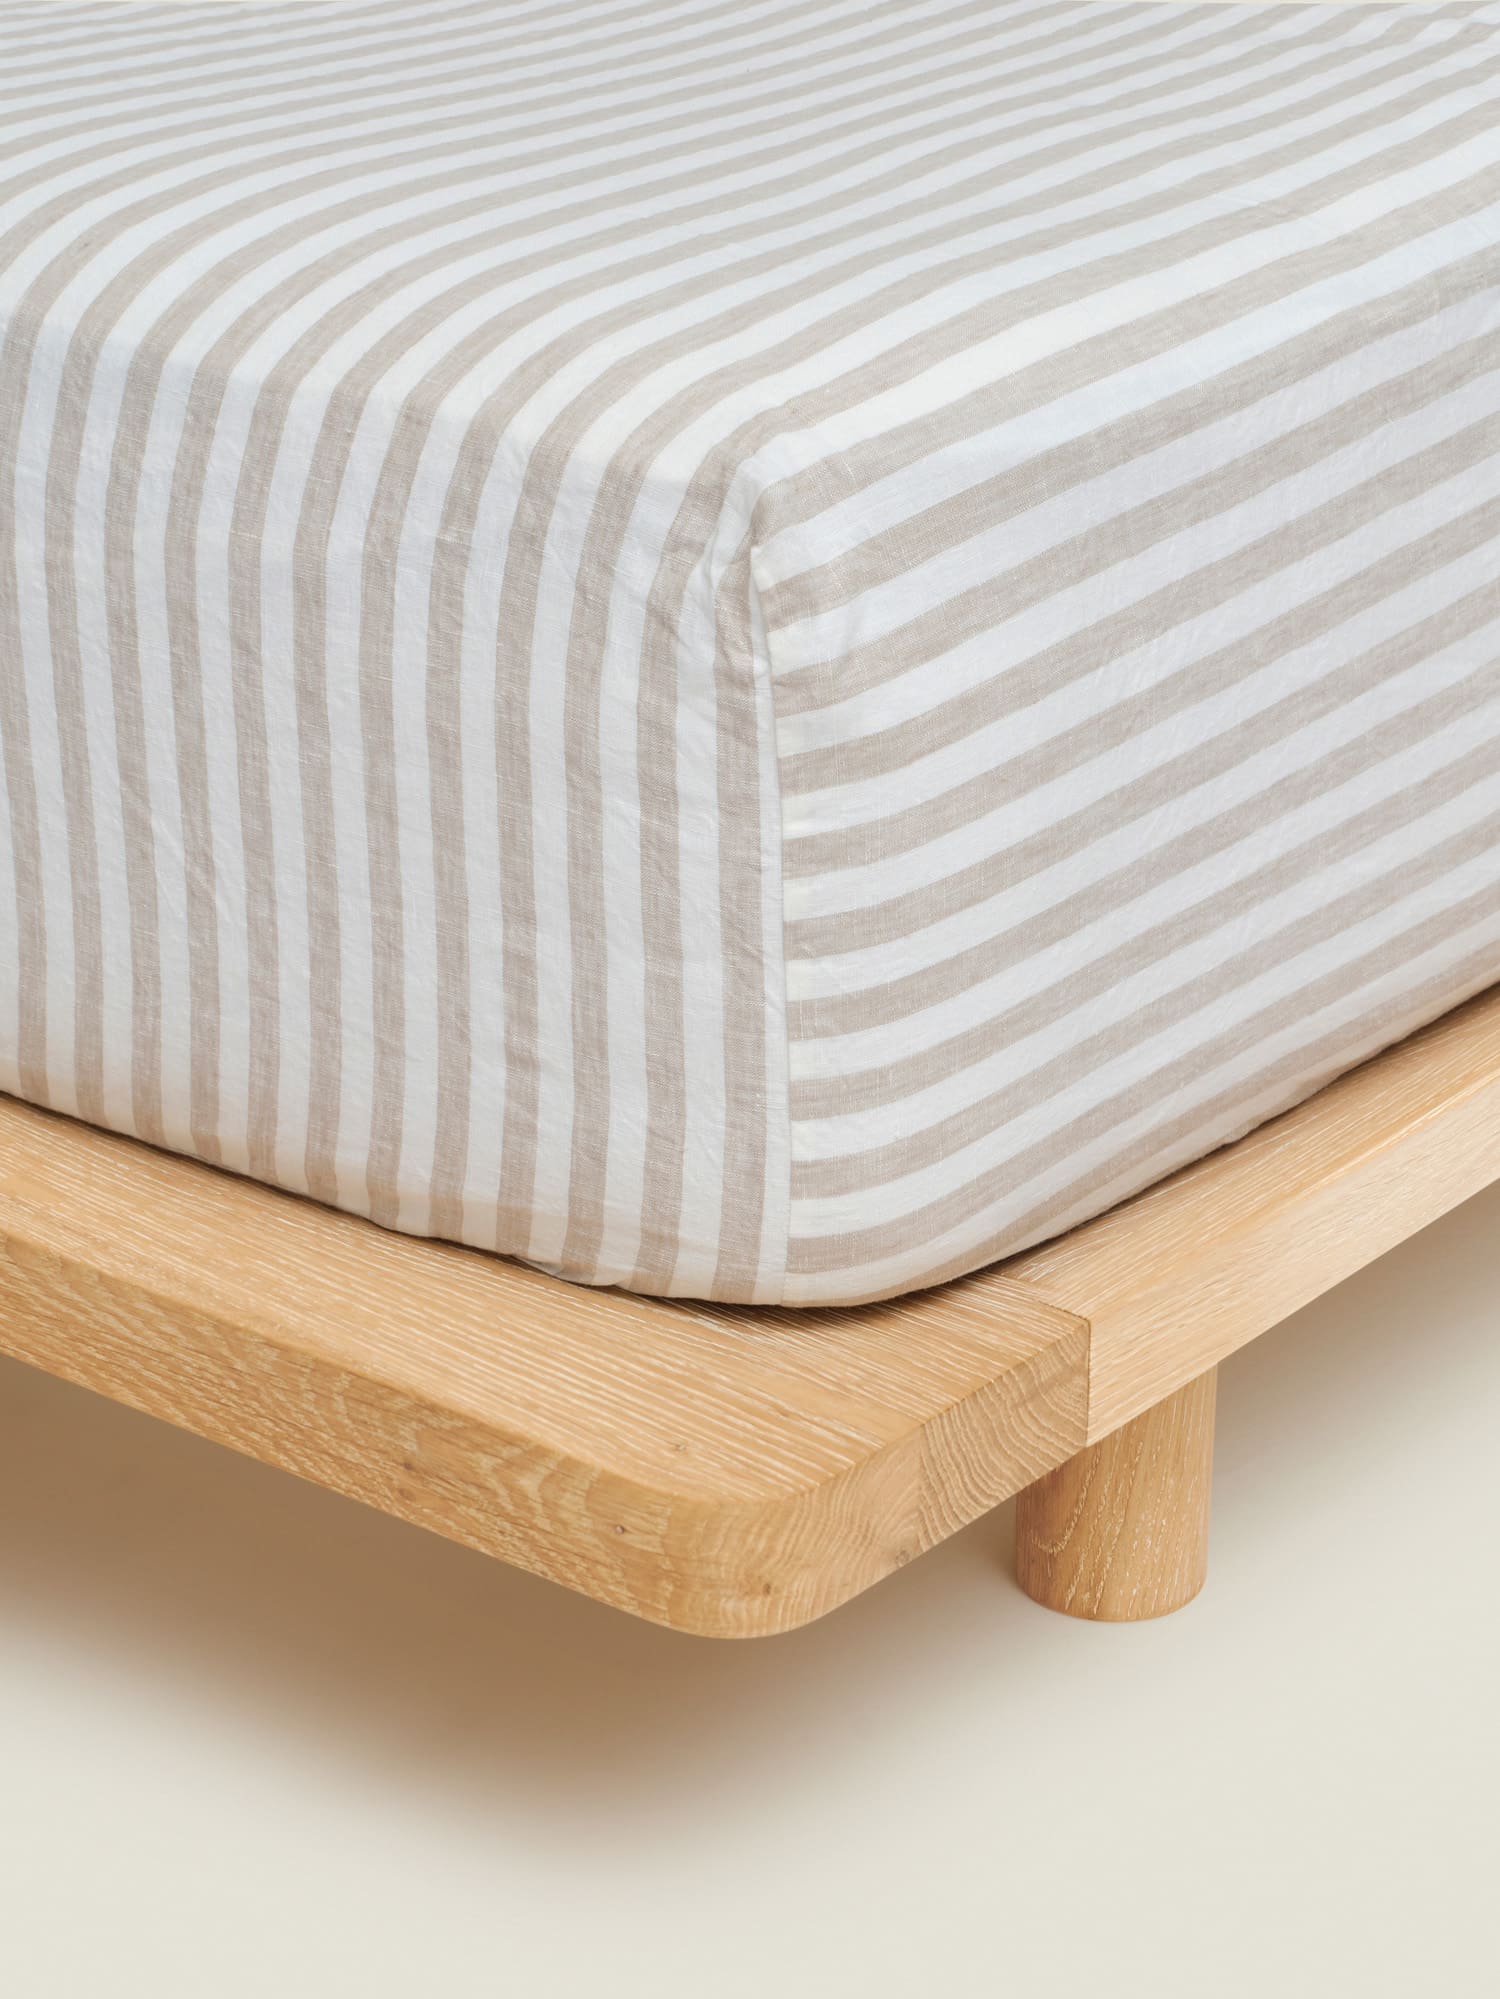 fitted sheet in wide natural stripes